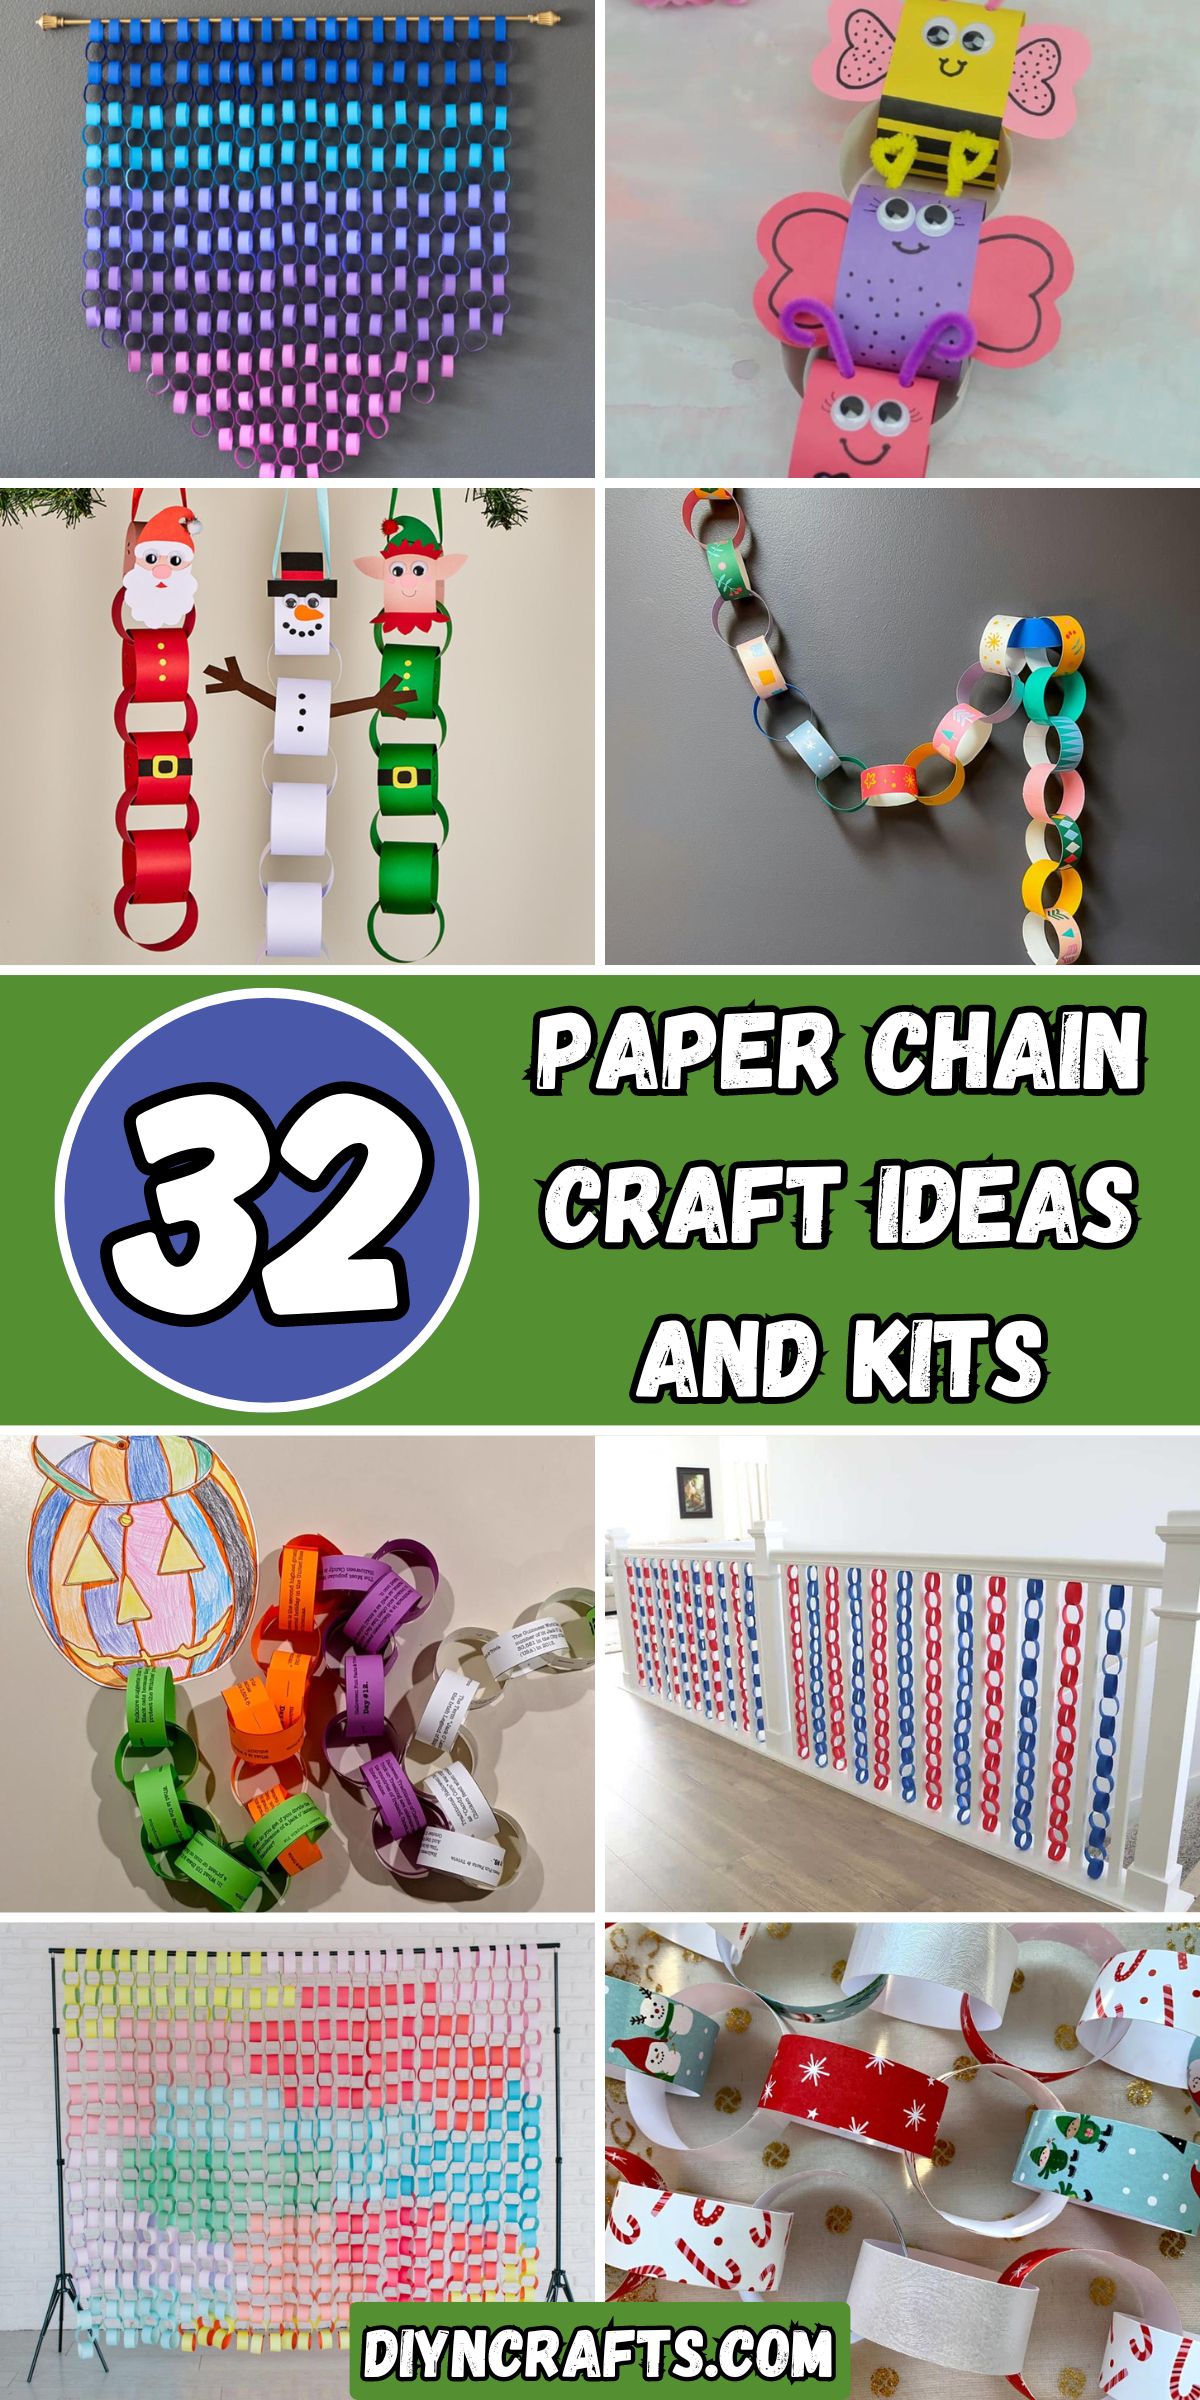 32 Paper Chain Craft Ideas and Projects - DIY & Crafts